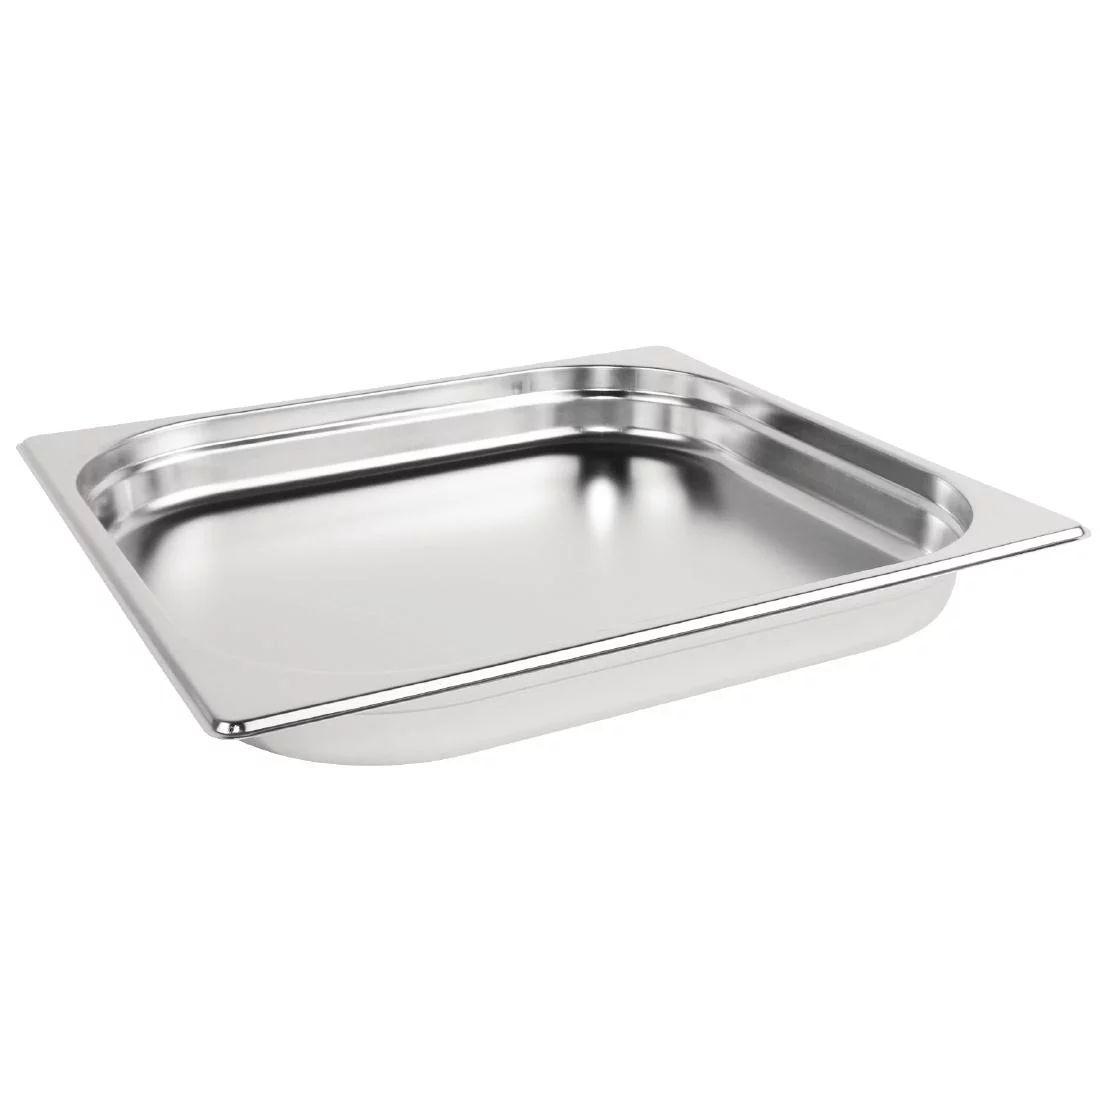 Ǔ Vogue Stainless Steel 2/3 Gastronorm Tray 65mm